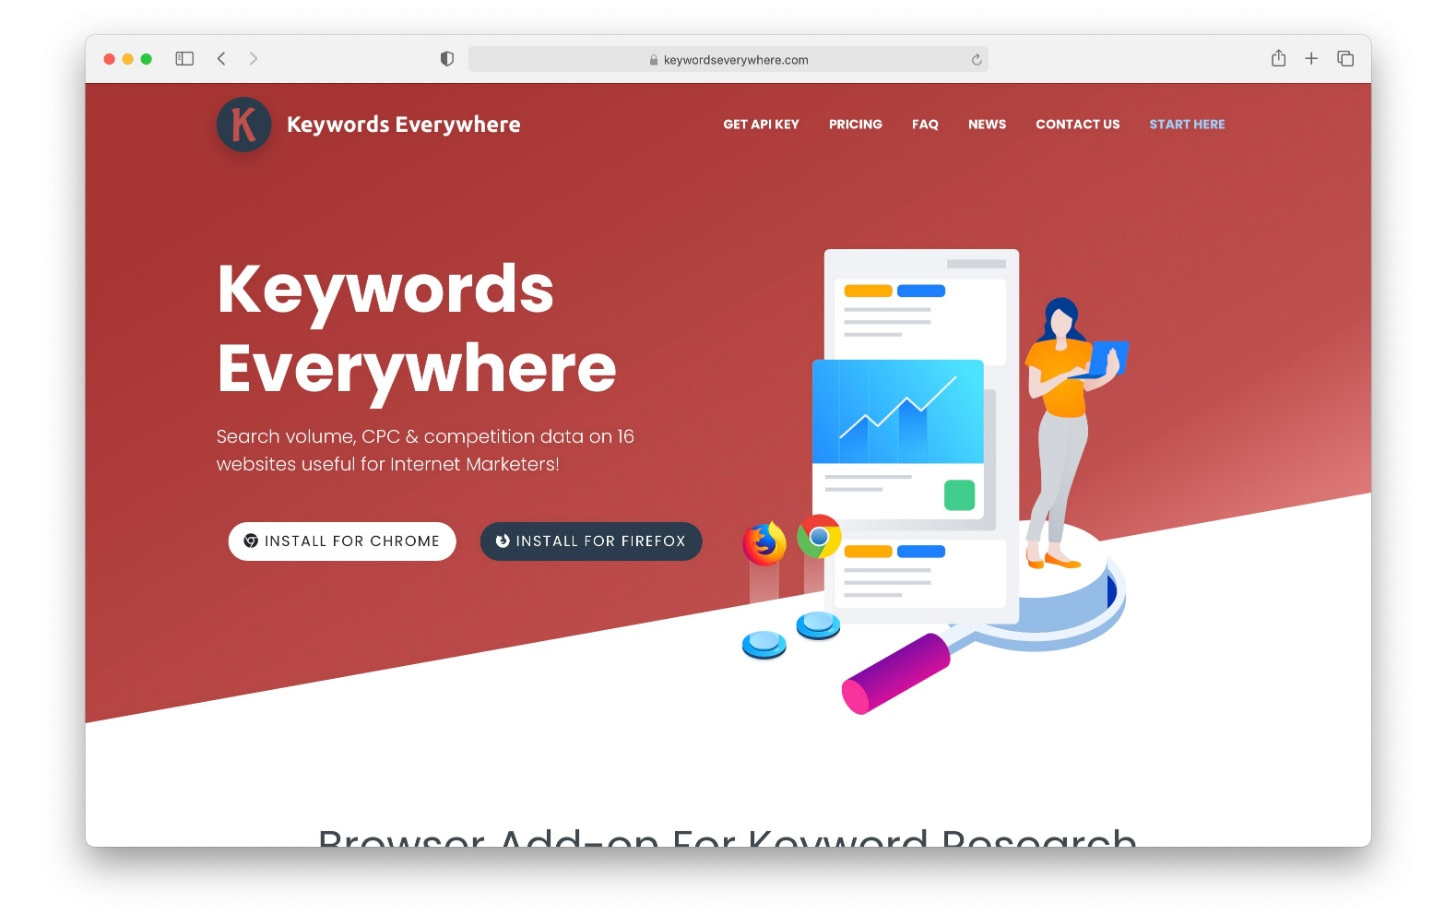 Keywords Everywhere is a browser extension